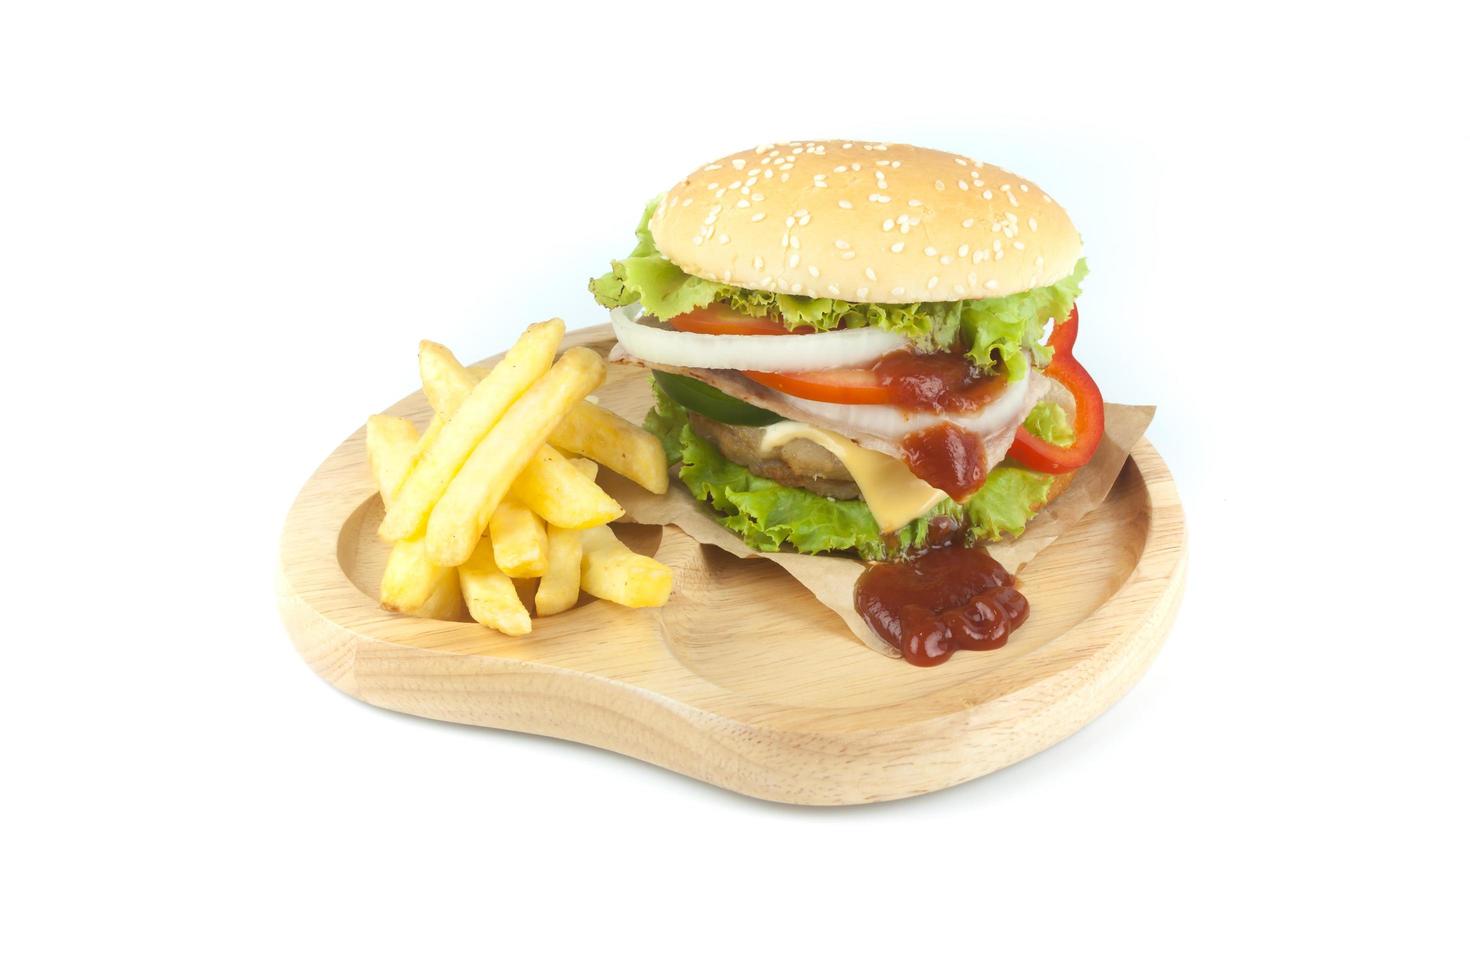 Pork hamburger Homemade with grilled bacon contains vegetables, cheese, lettuce, onion, chilli, spices in a wooden dish isolated on white backgroud photo